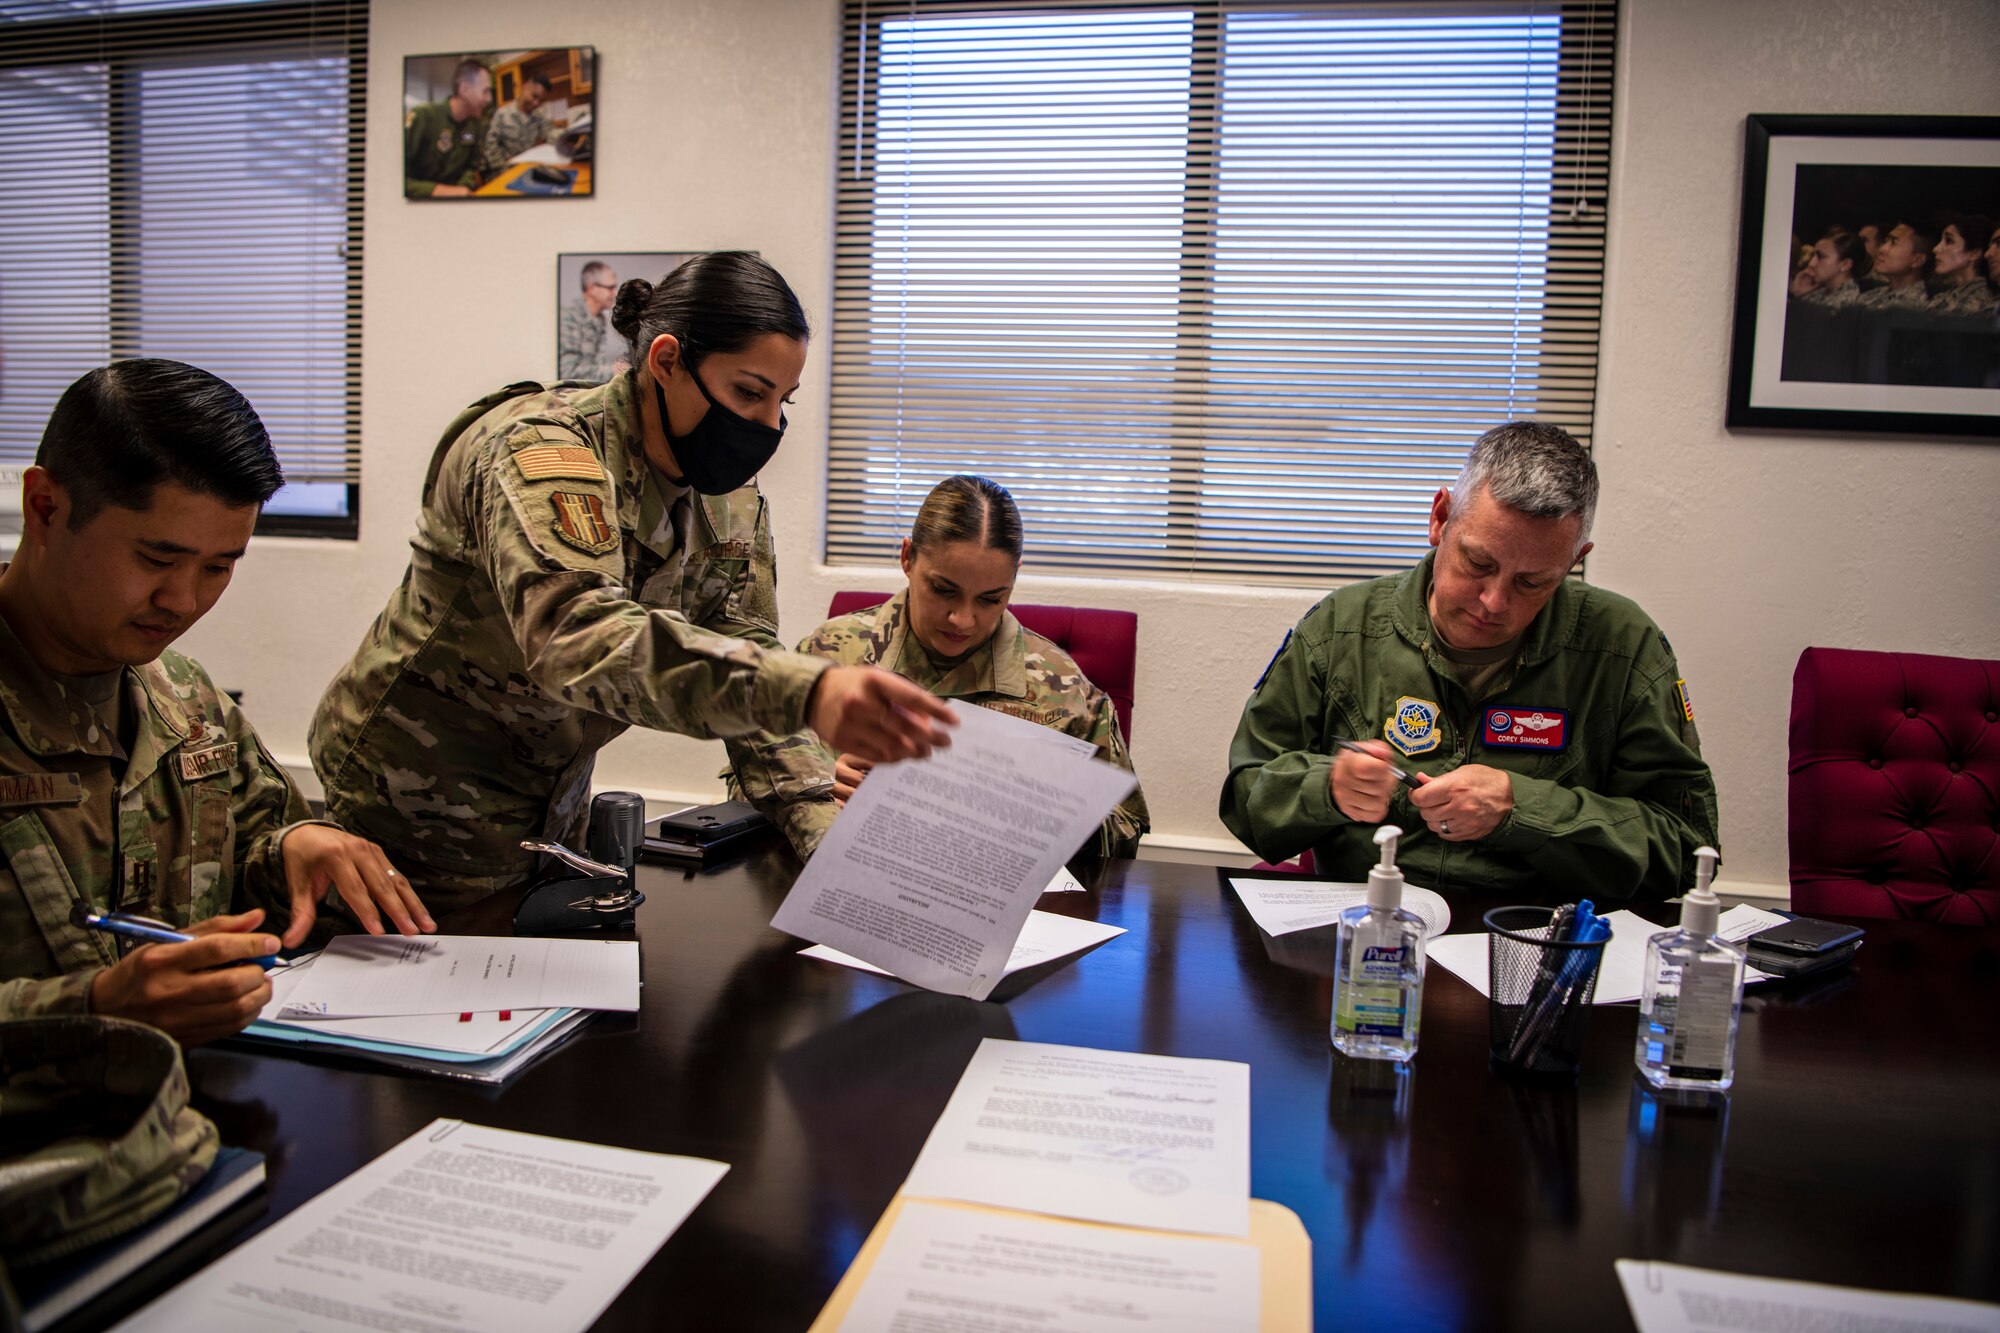 Four Airmen are huddled around a table signing paperwork.